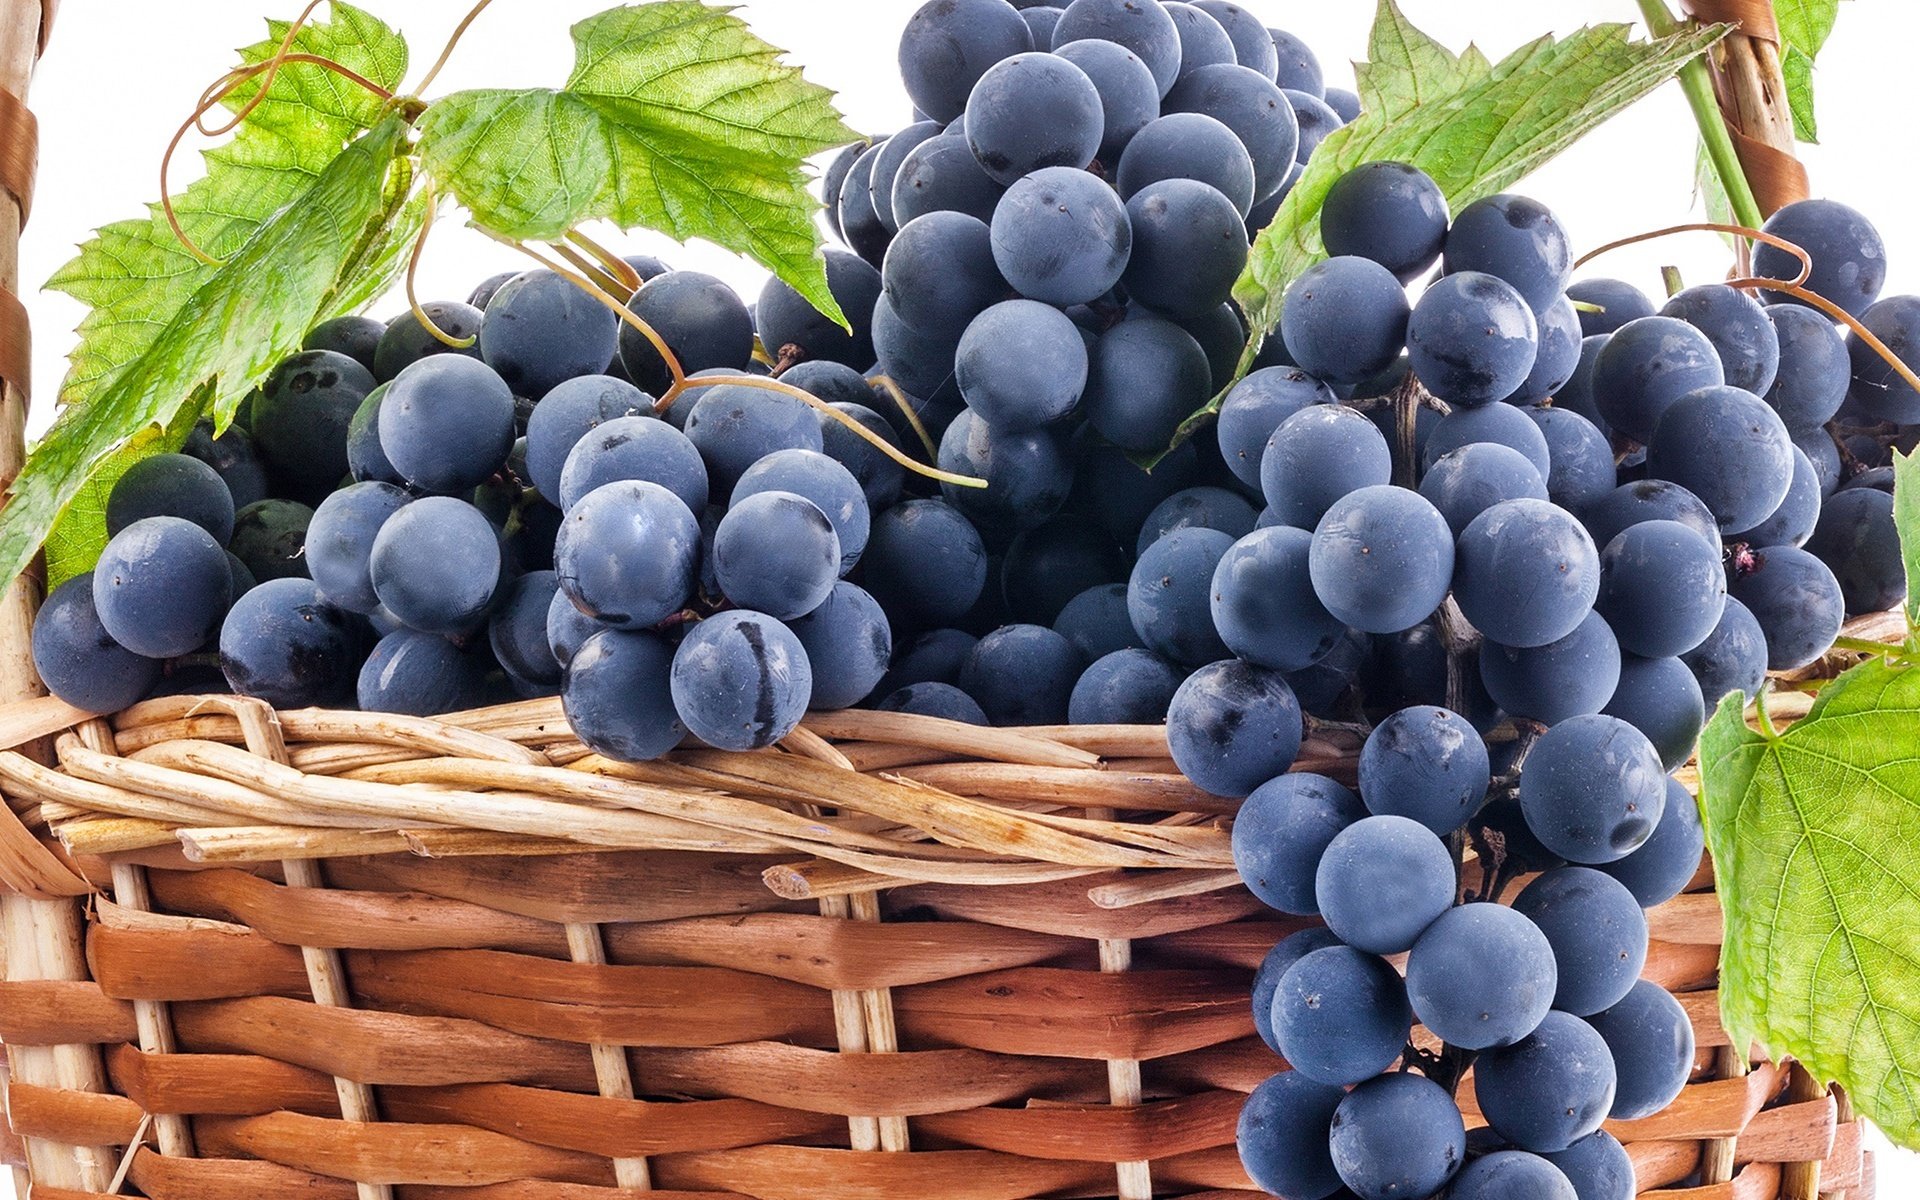 219 Grapes Hd Wallpapers Background Images Wallpaper Abyss Images, Photos, Reviews